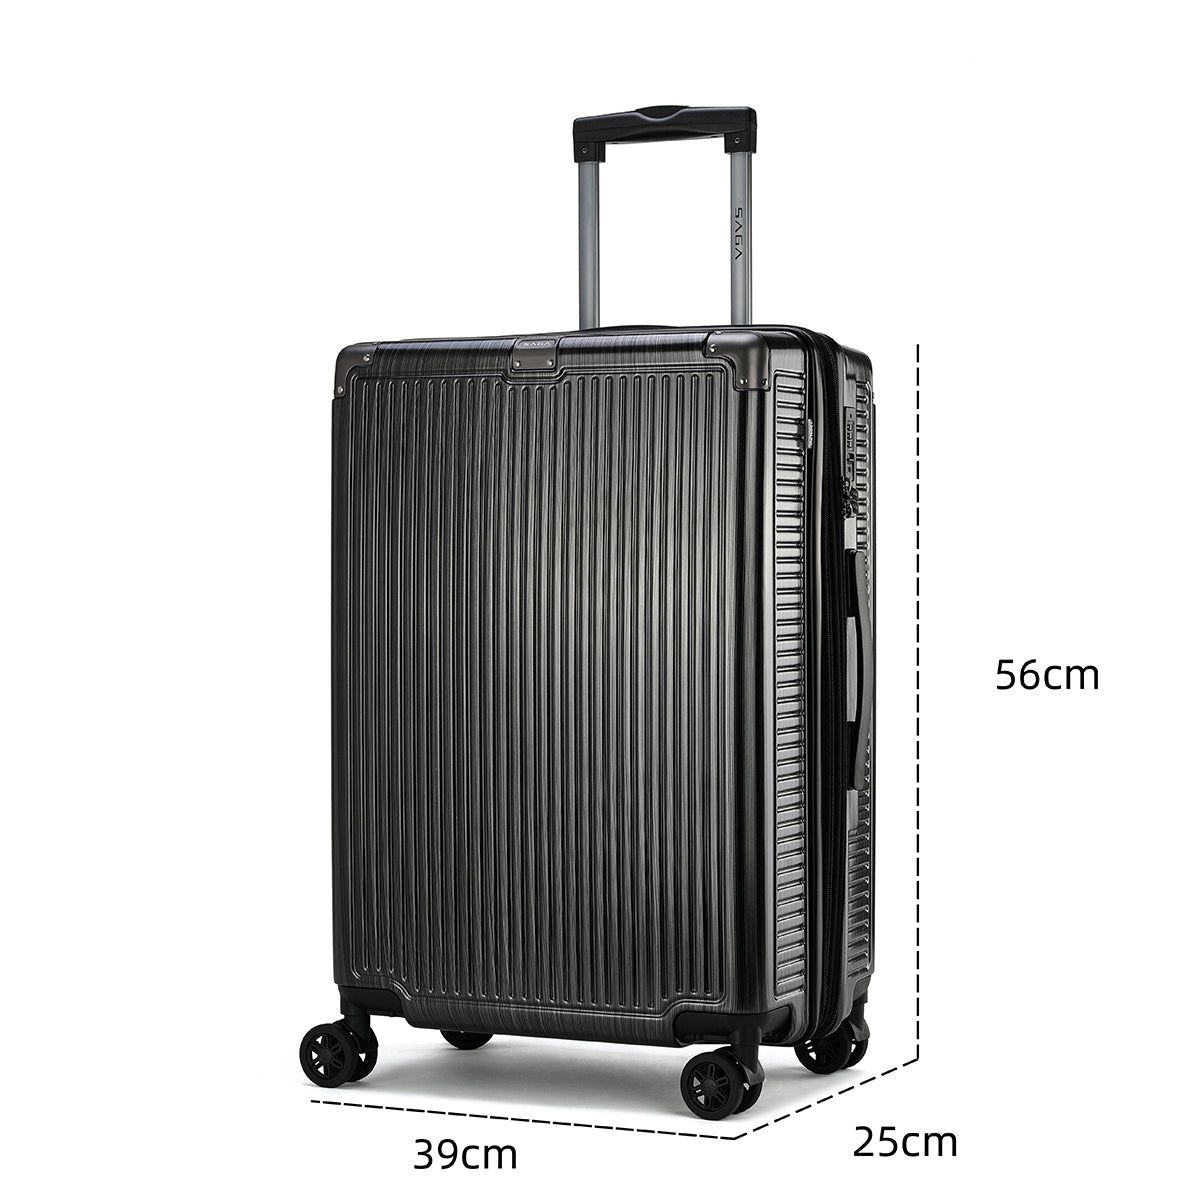 A set of 4 polycarbonate travel bags. Strong durability, dark gray bold design